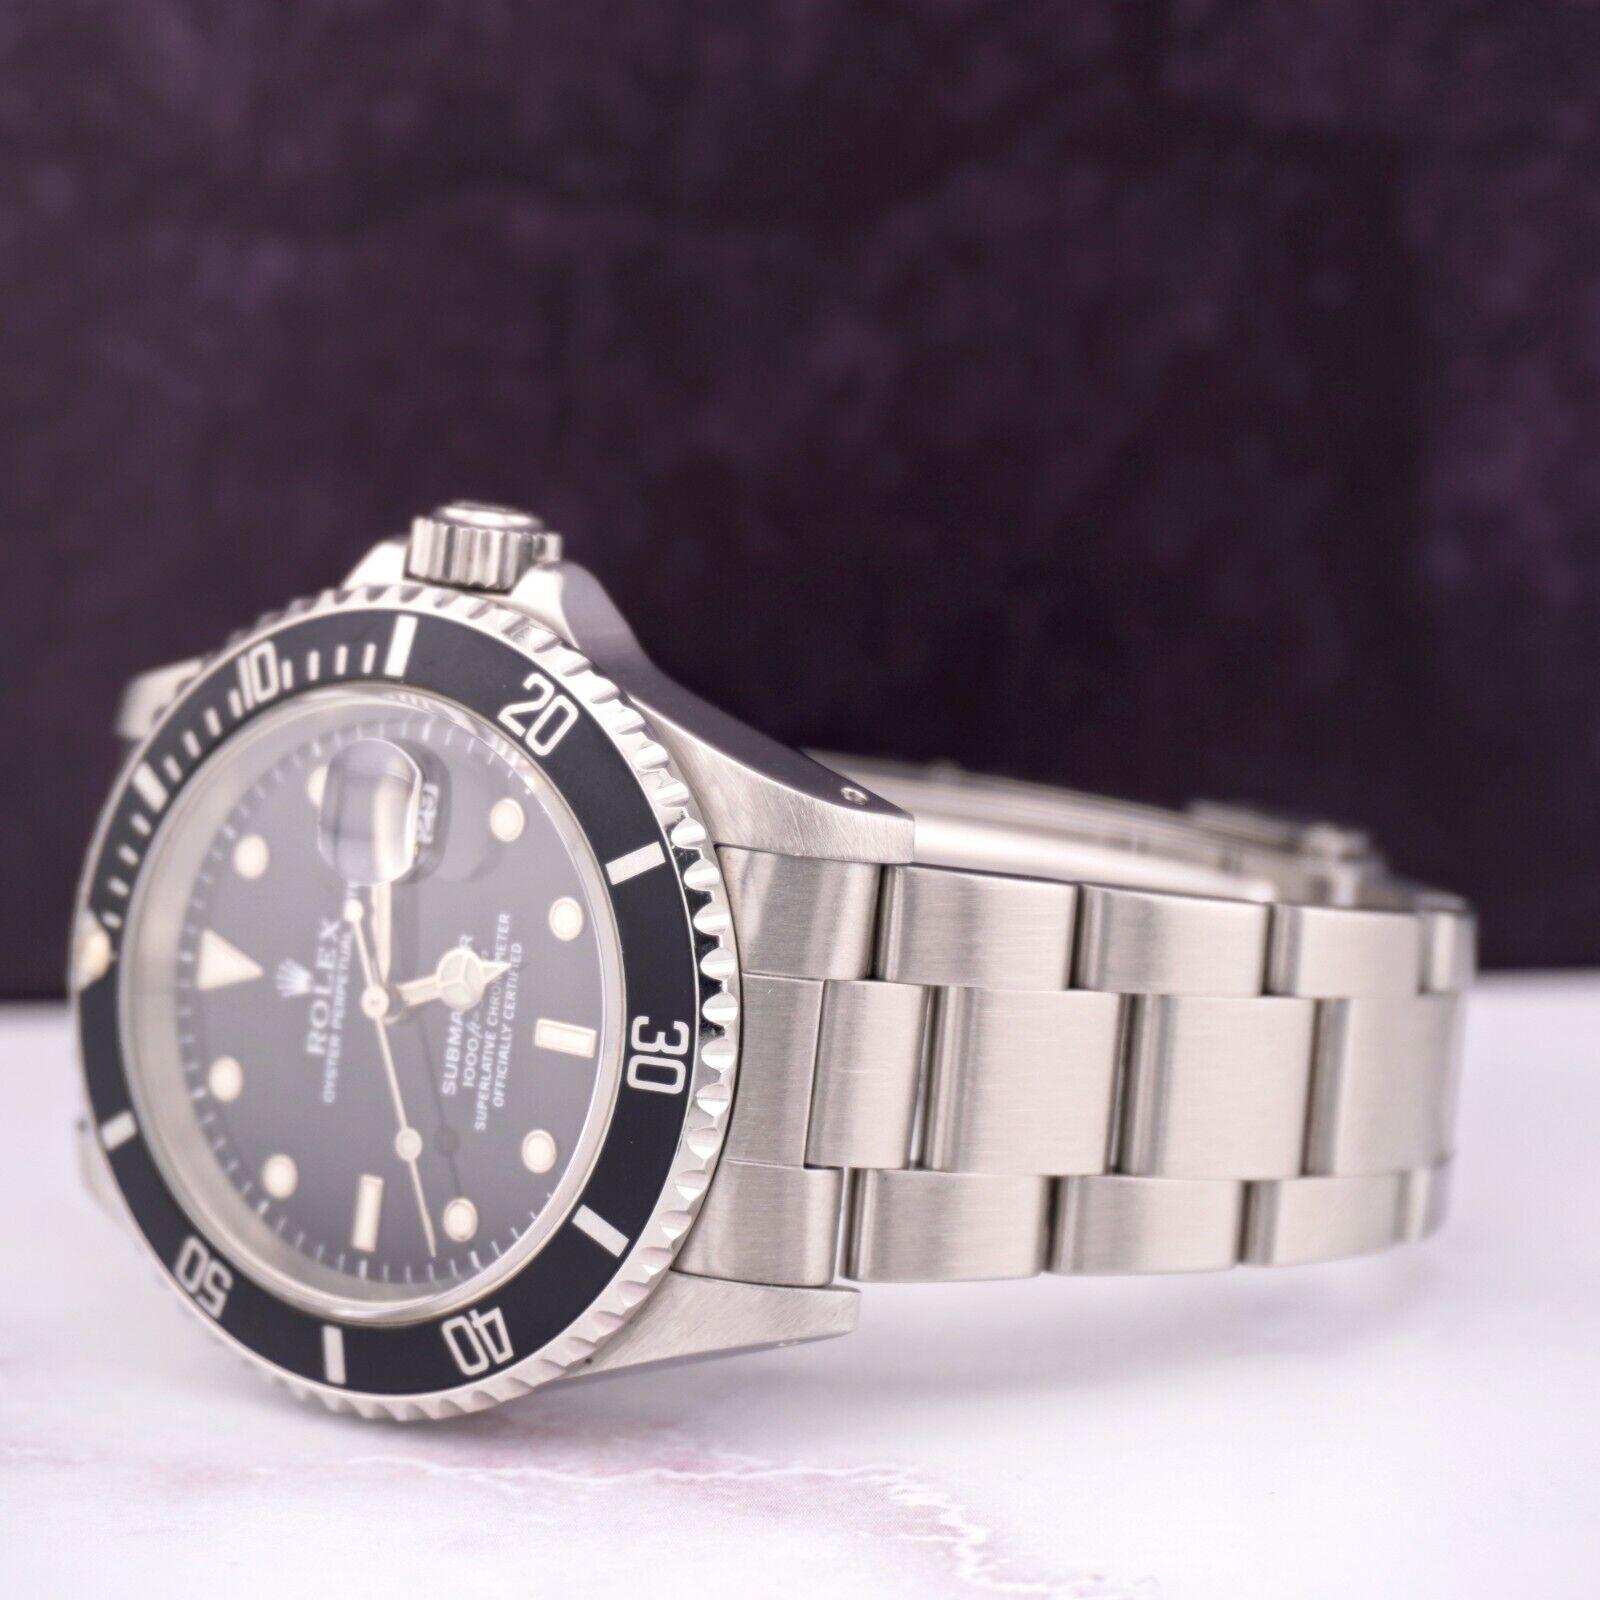 Rolex Submariner Date 40mm Steel Black Dial Mens Watch Oyster 16610 In Excellent Condition For Sale In Pleasanton, CA